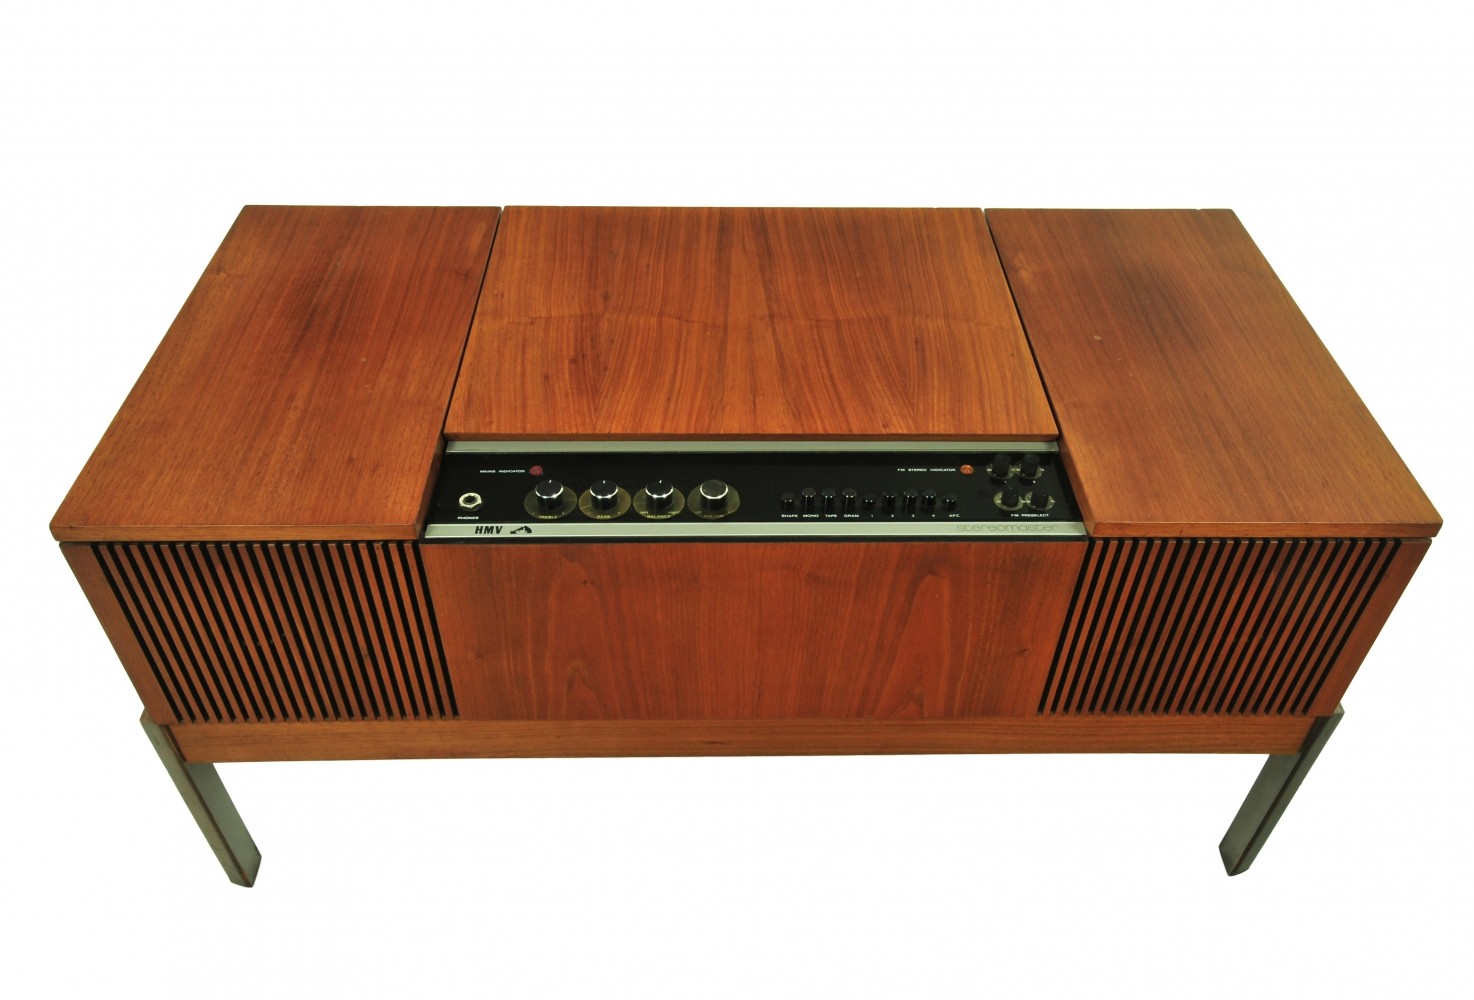 stereomaster-hifi-cabinet-with-tuner-and-record-player-by-his-masters-voice-1970s.jpg